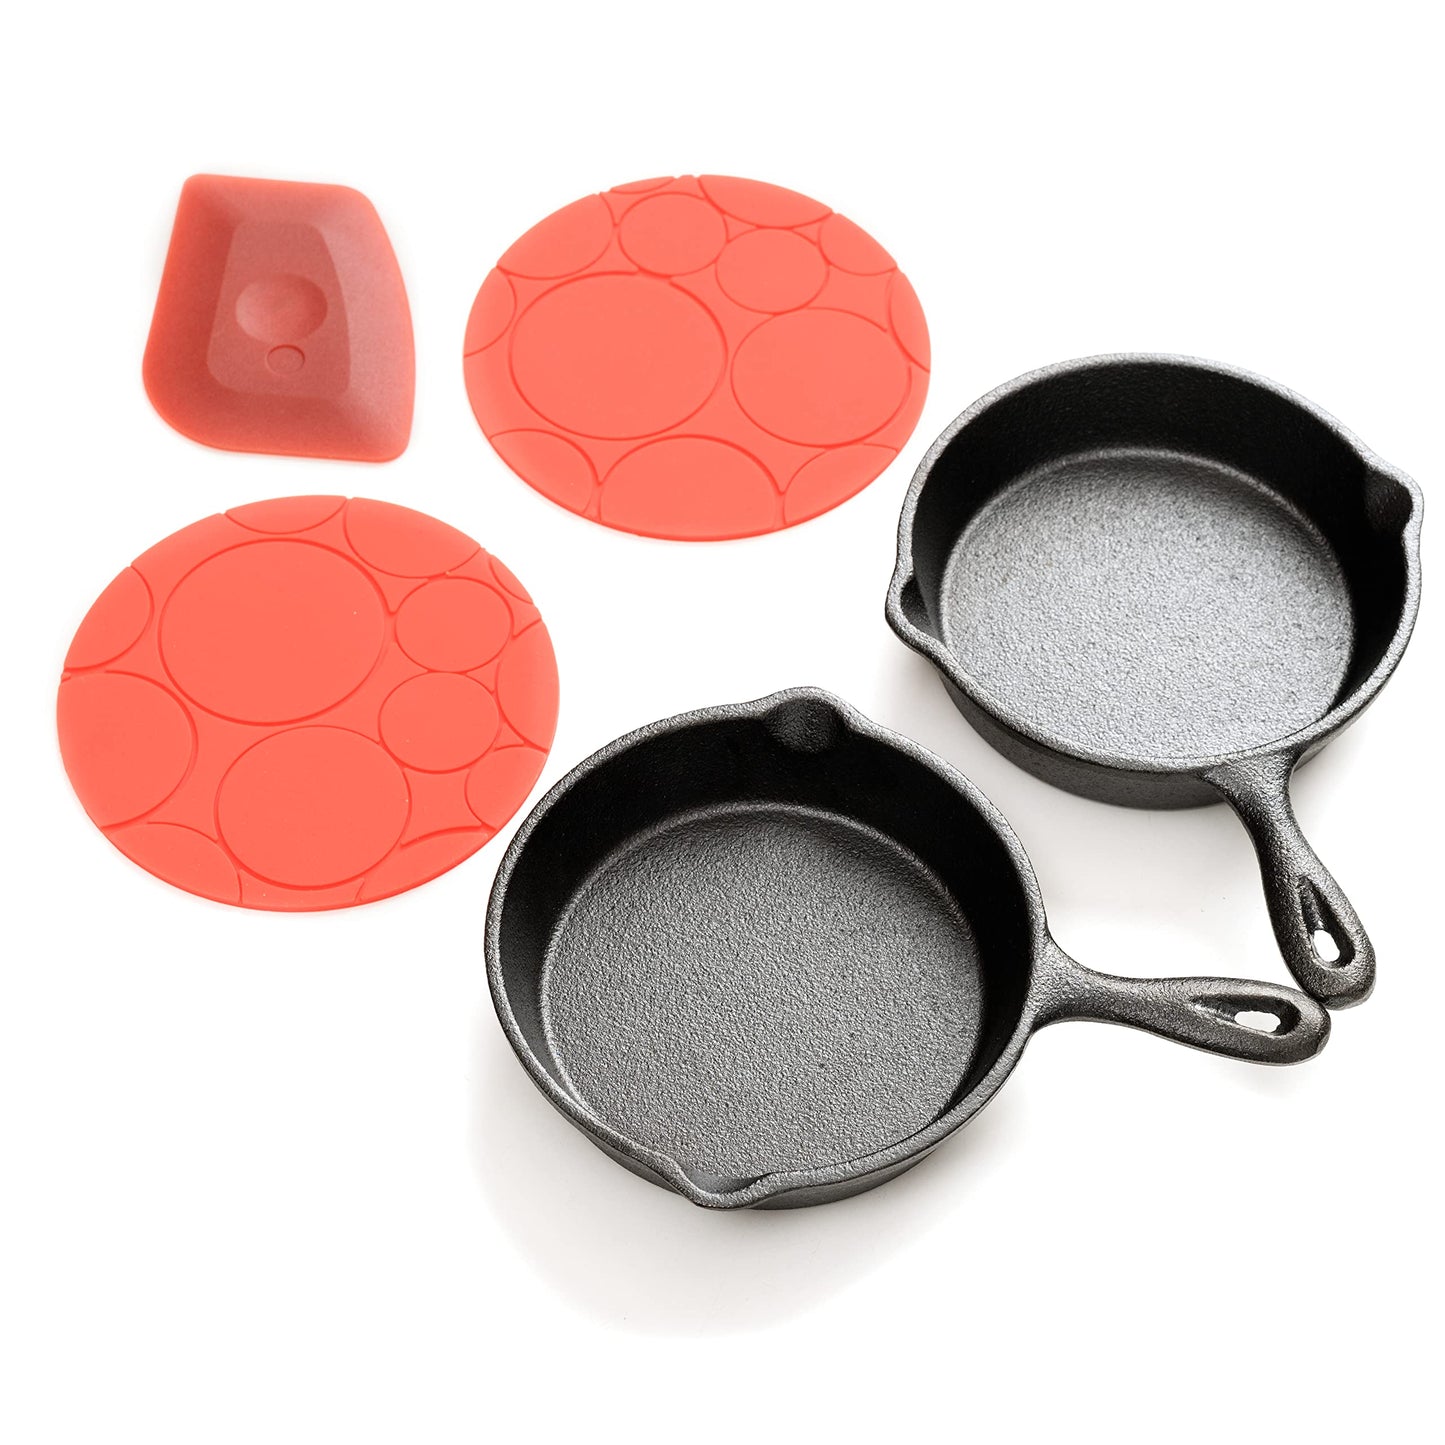 KUHA Biscuit Pan - Pre-Seasoned Cast Iron Skillet for Baking Biscuits,  Muffins, Mini Cakes - with Silicone Trivet